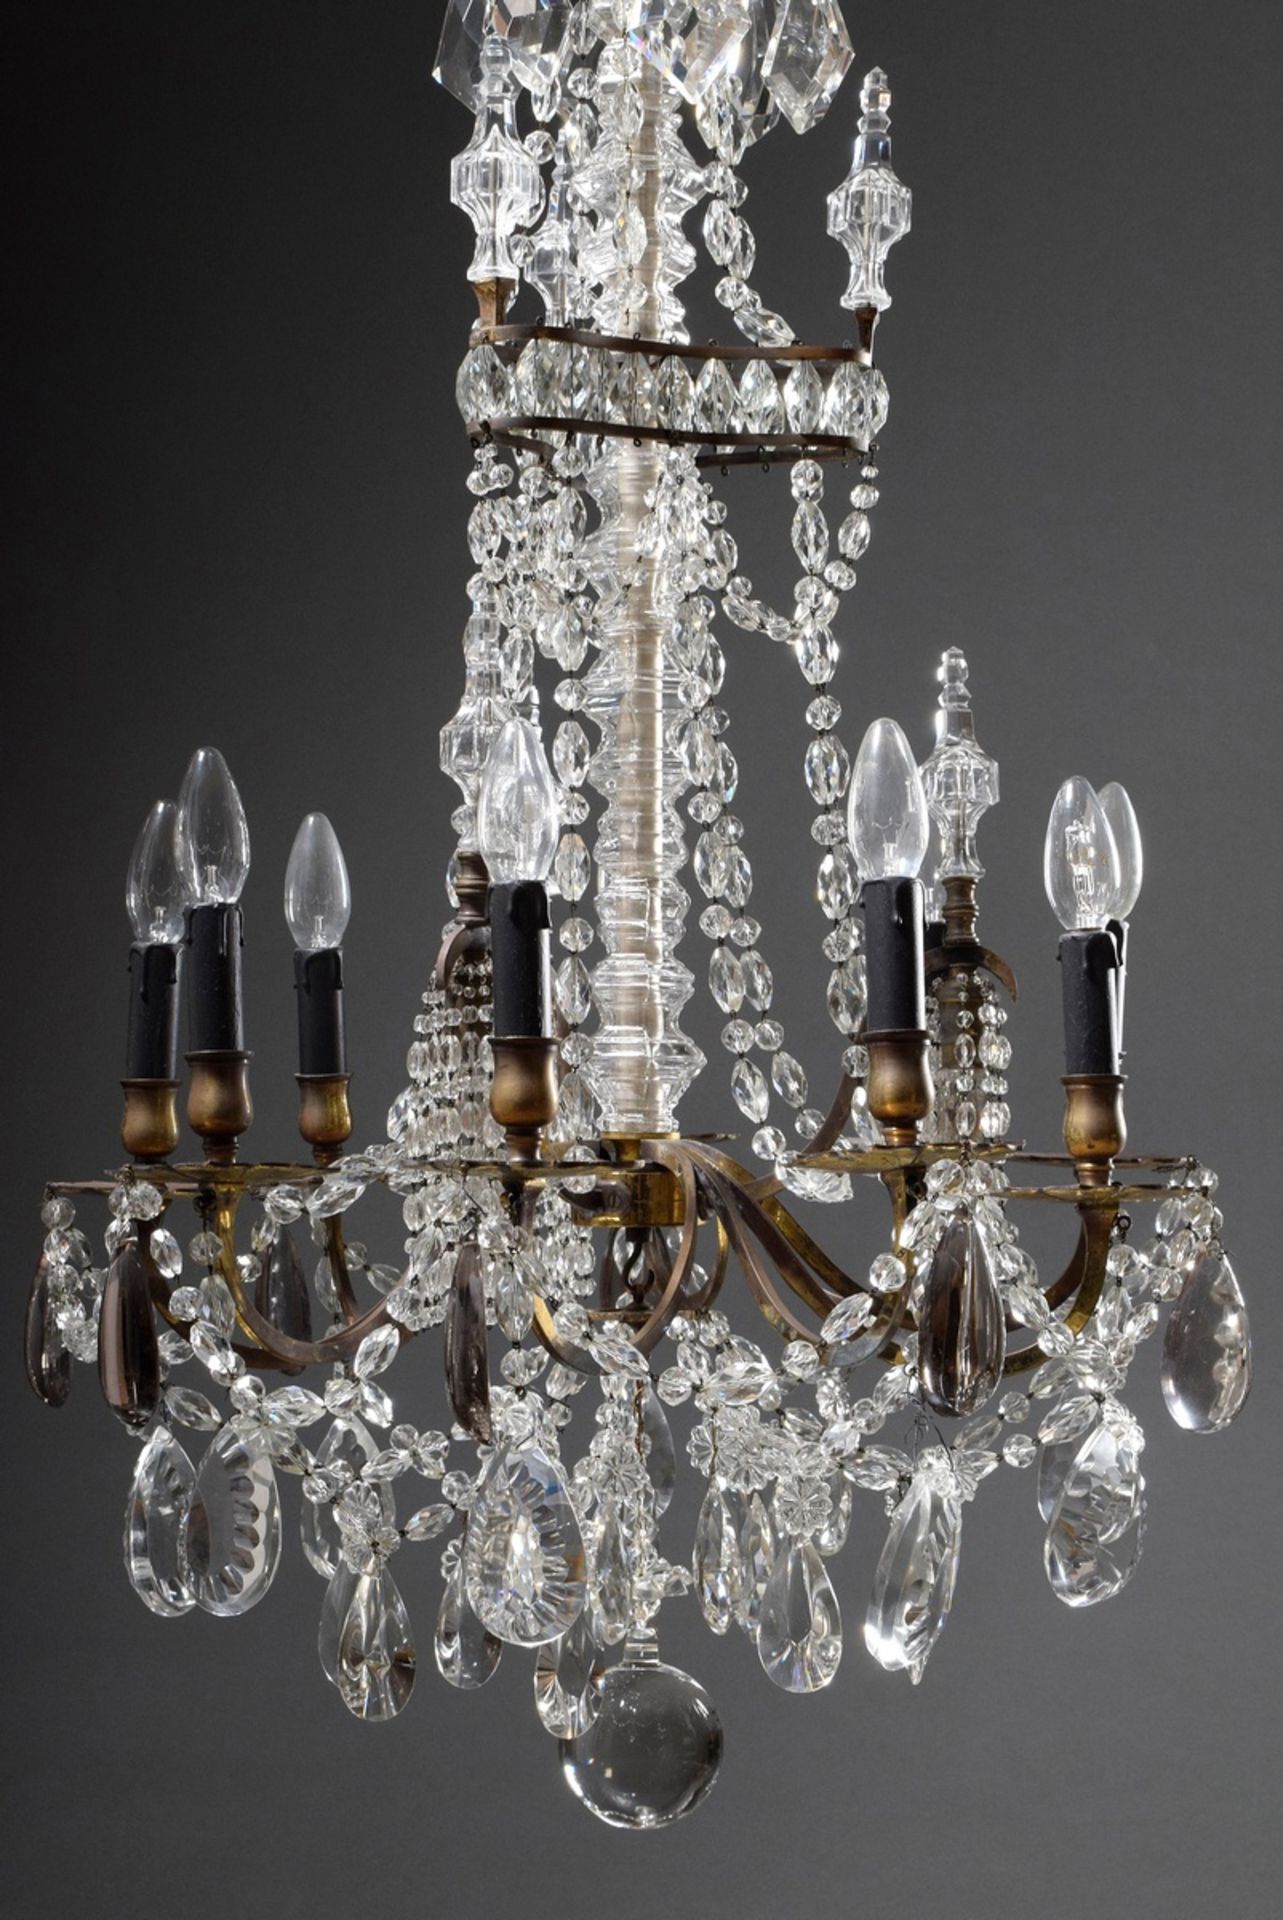 Fire-gilt bronze chandelier with elaborate prismatic hangings and cut balusters on a triangular bas - Image 3 of 9